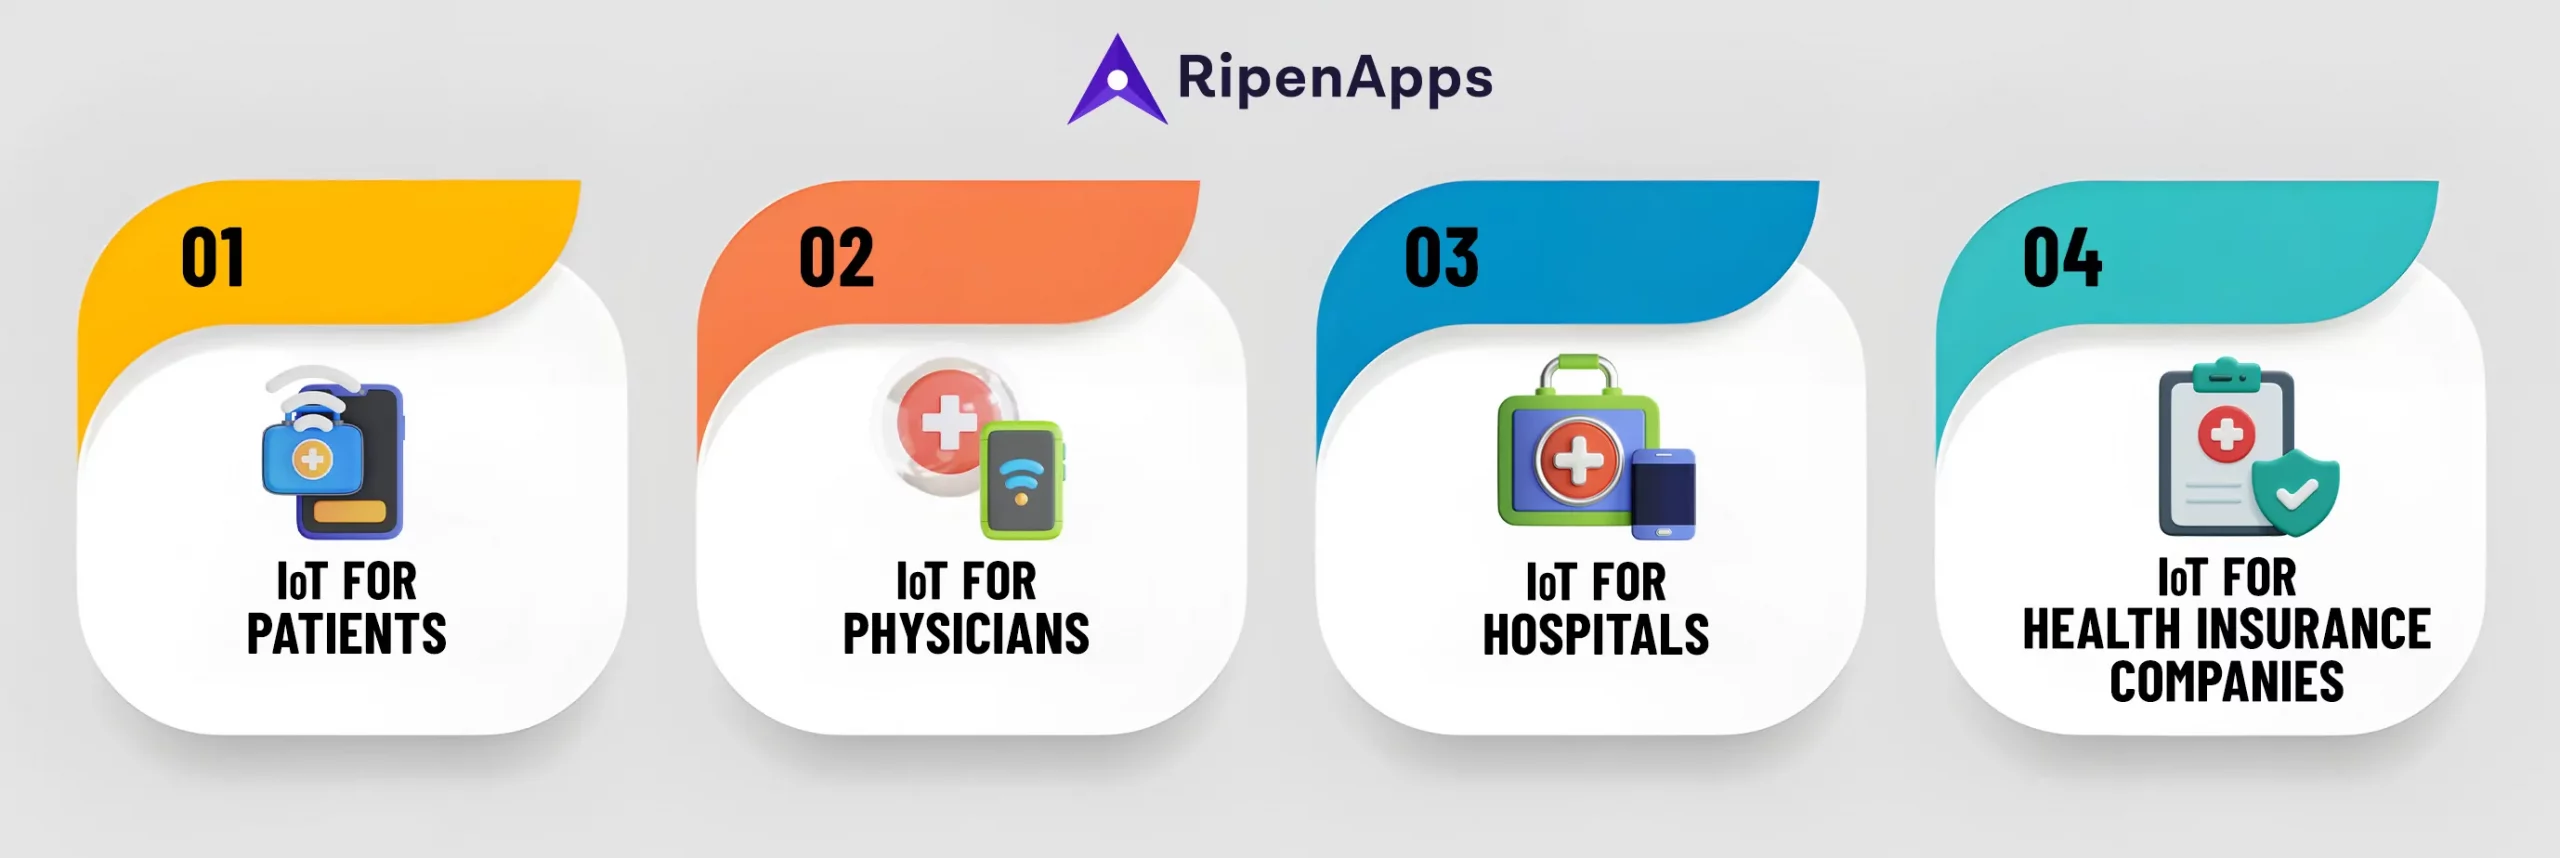 Healthcare Domains Can Use IoT Devices